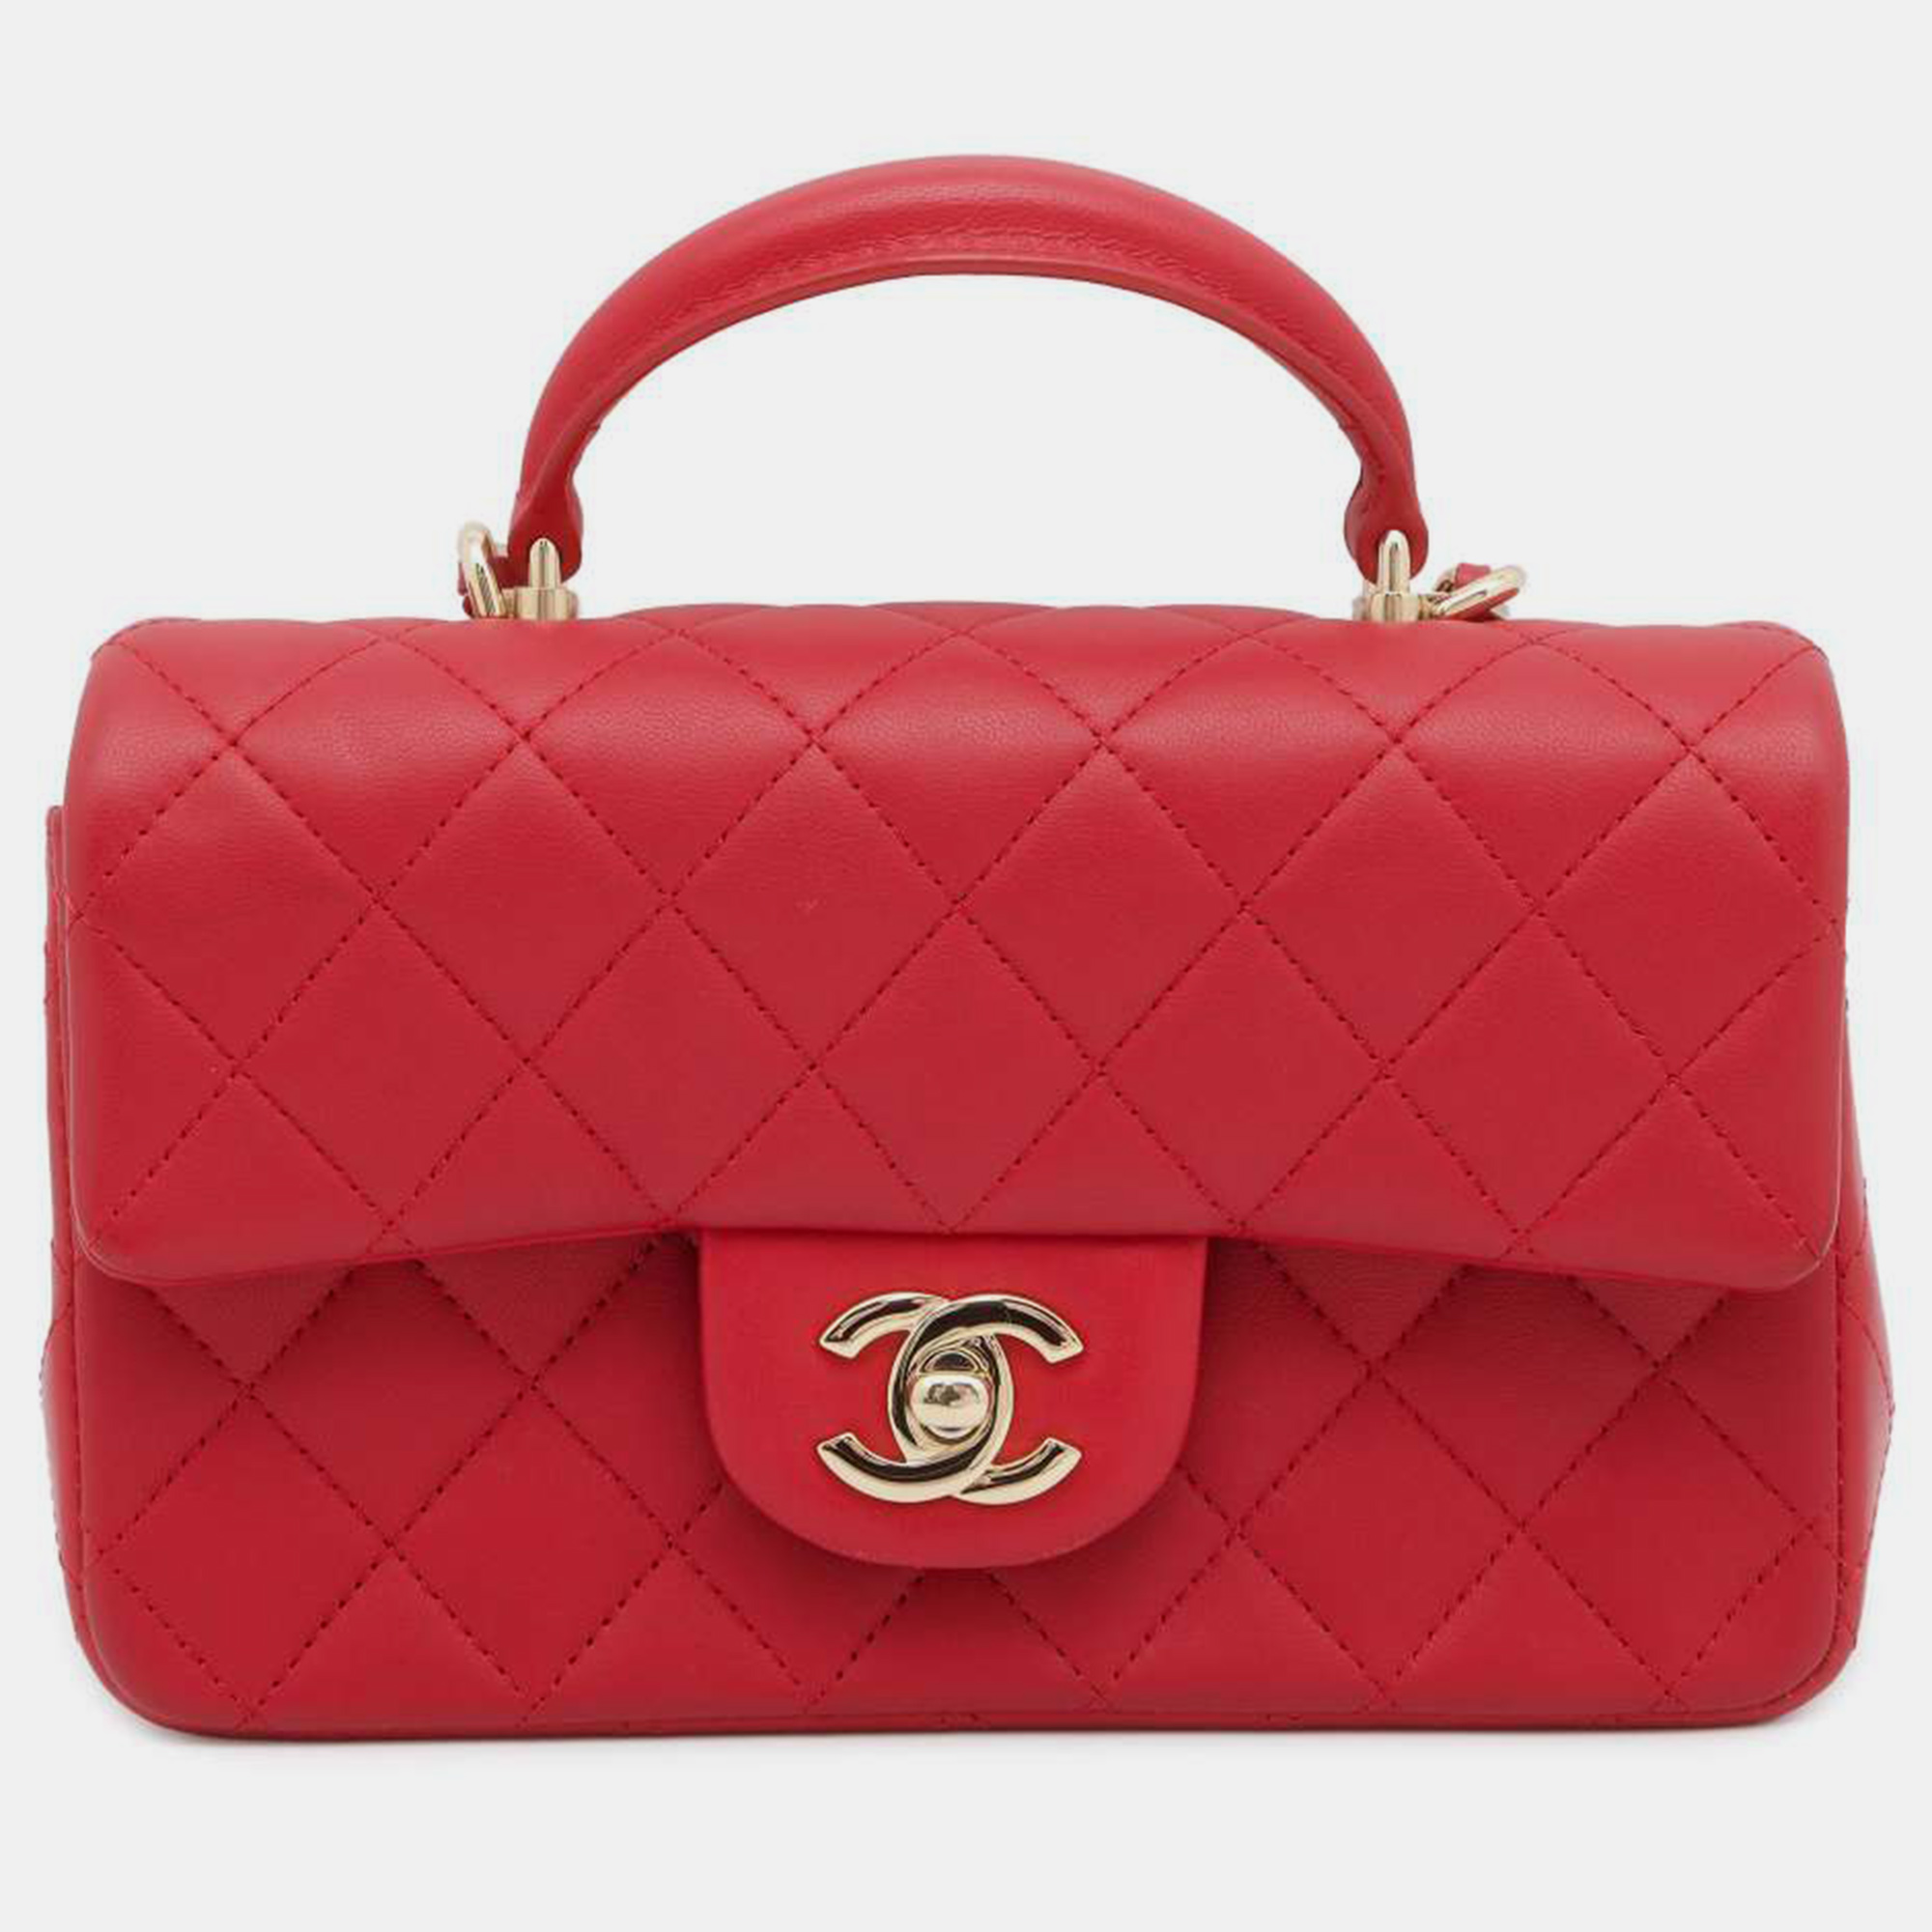 Pre-owned Chanel Red Leather Top Handle Flap Bag